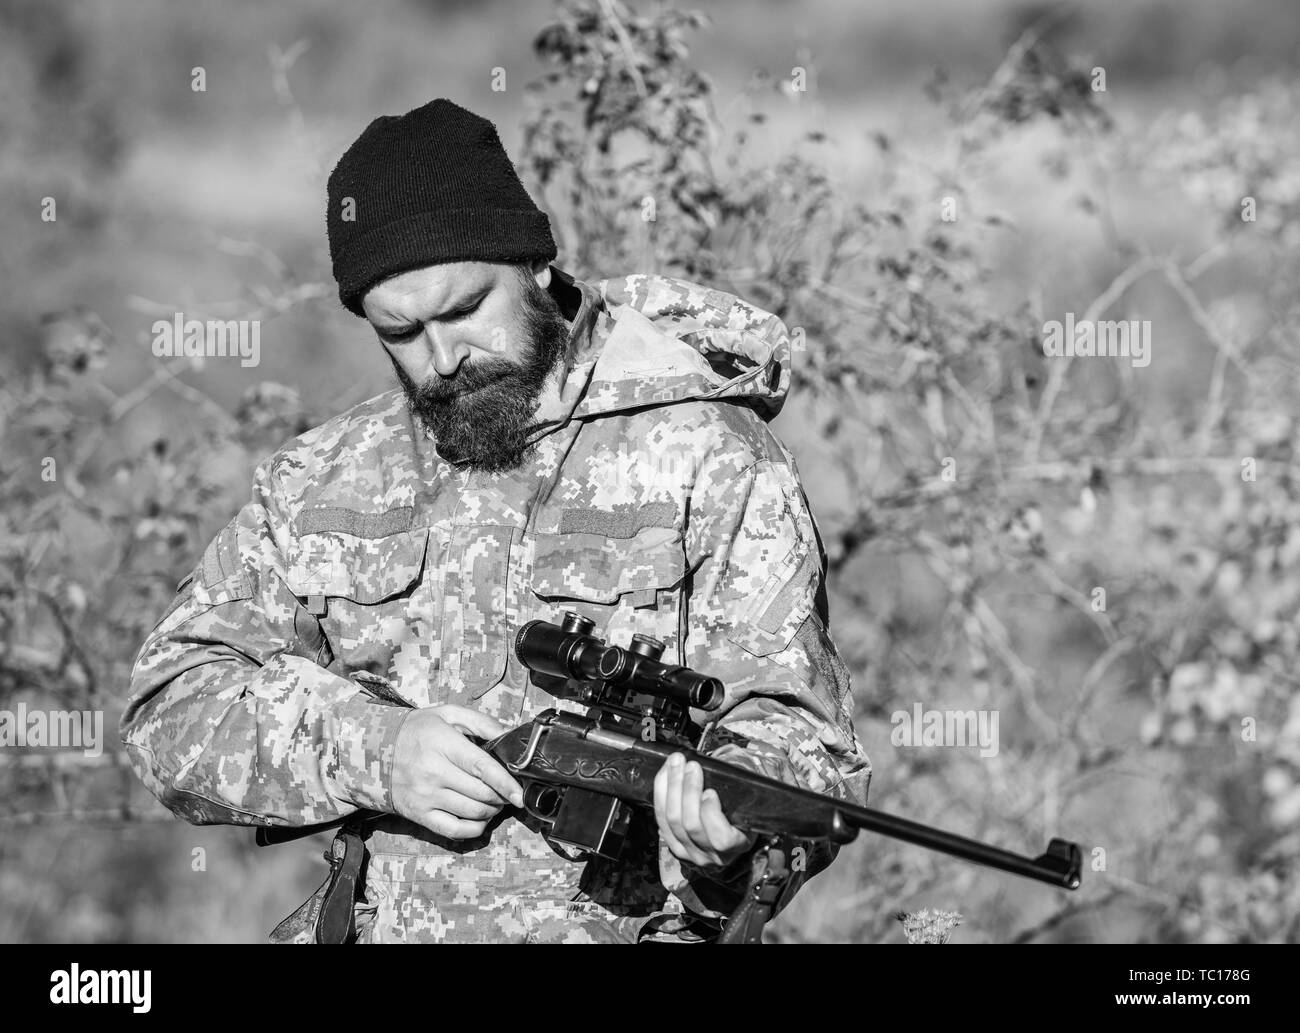 Man hunter with rifle gun. Boot camp. Bearded man hunter. Army forces. Camouflage. Military uniform fashion. Hunting skills and weapon equipment. How turn hunting into hobby. Cowboy with gun. Stock Photo